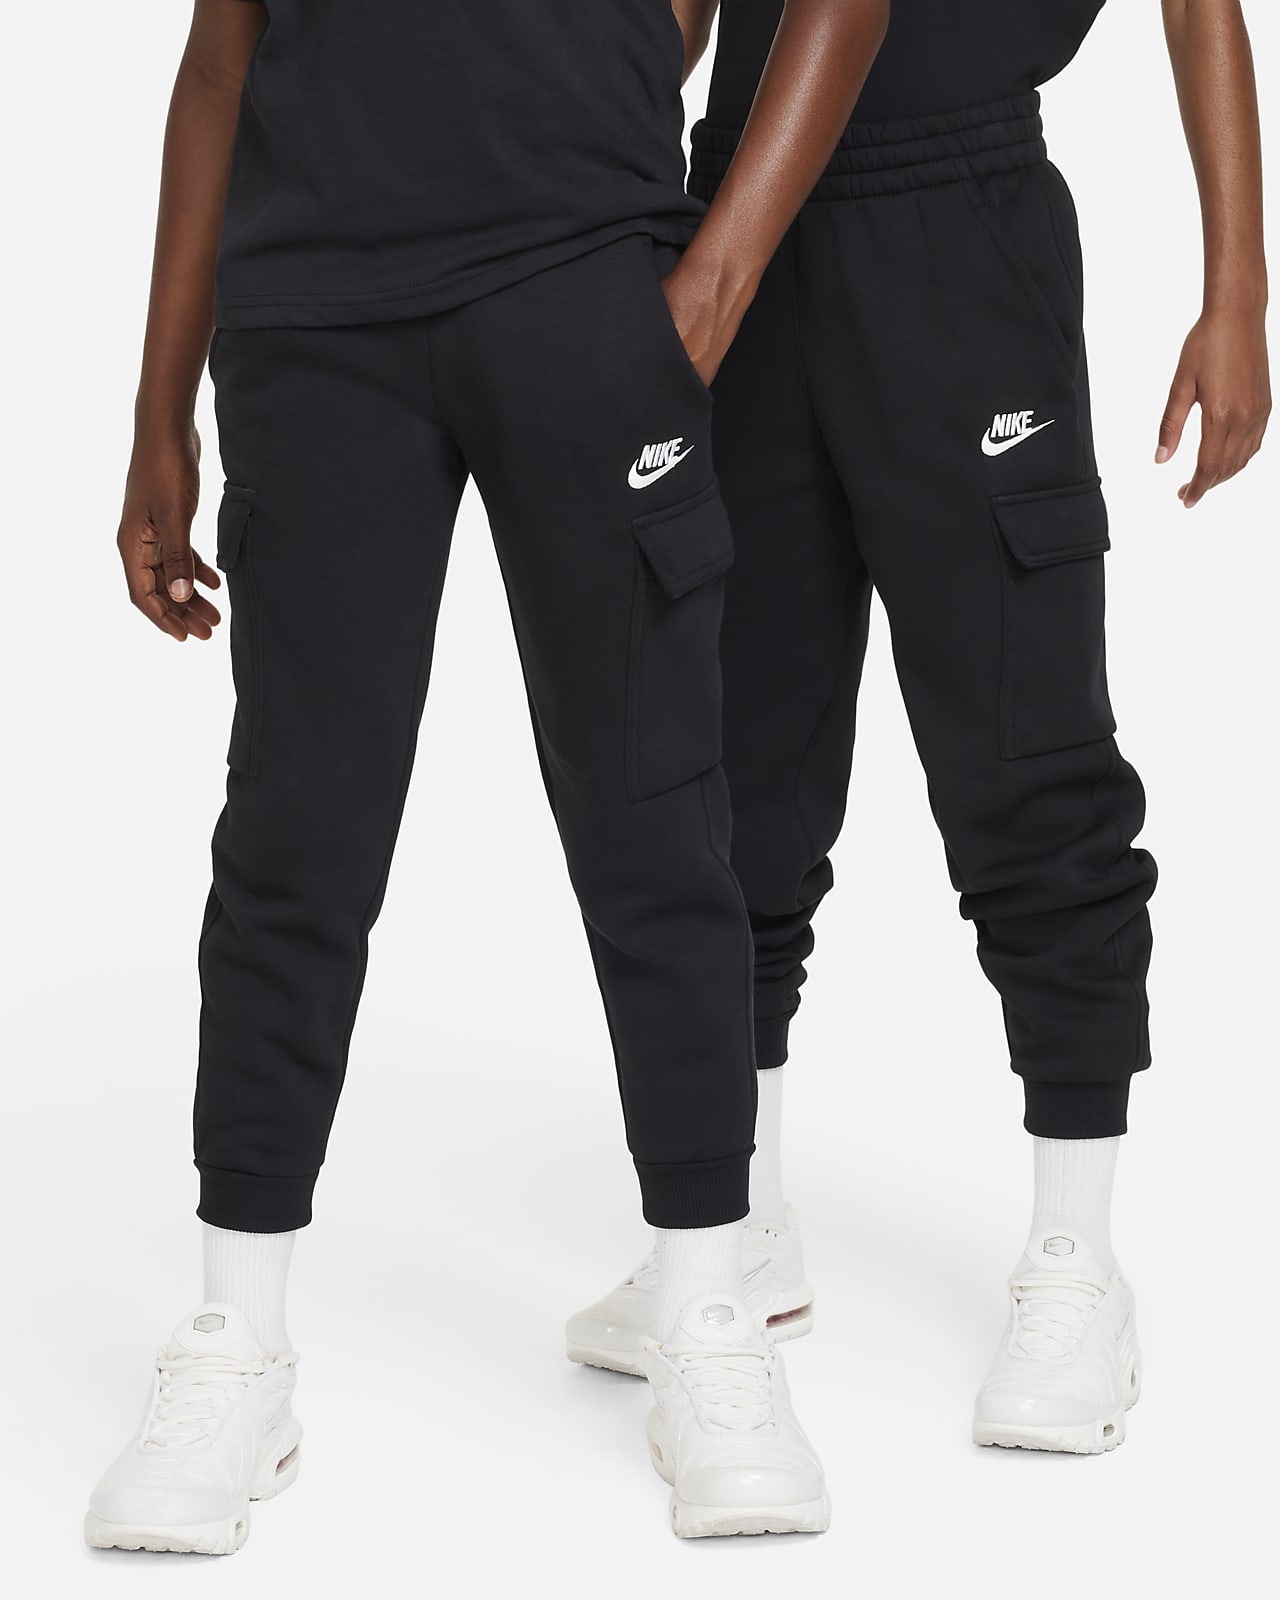 https://static.nike.com/a/images/t_PDP_1280_v1/f_auto,q_auto:eco/ee3f5a48-3cba-491b-8a2d-f3cd9f968b3e/sportswear-club-fleece-older-cargo-trousers-q4XSCh.png